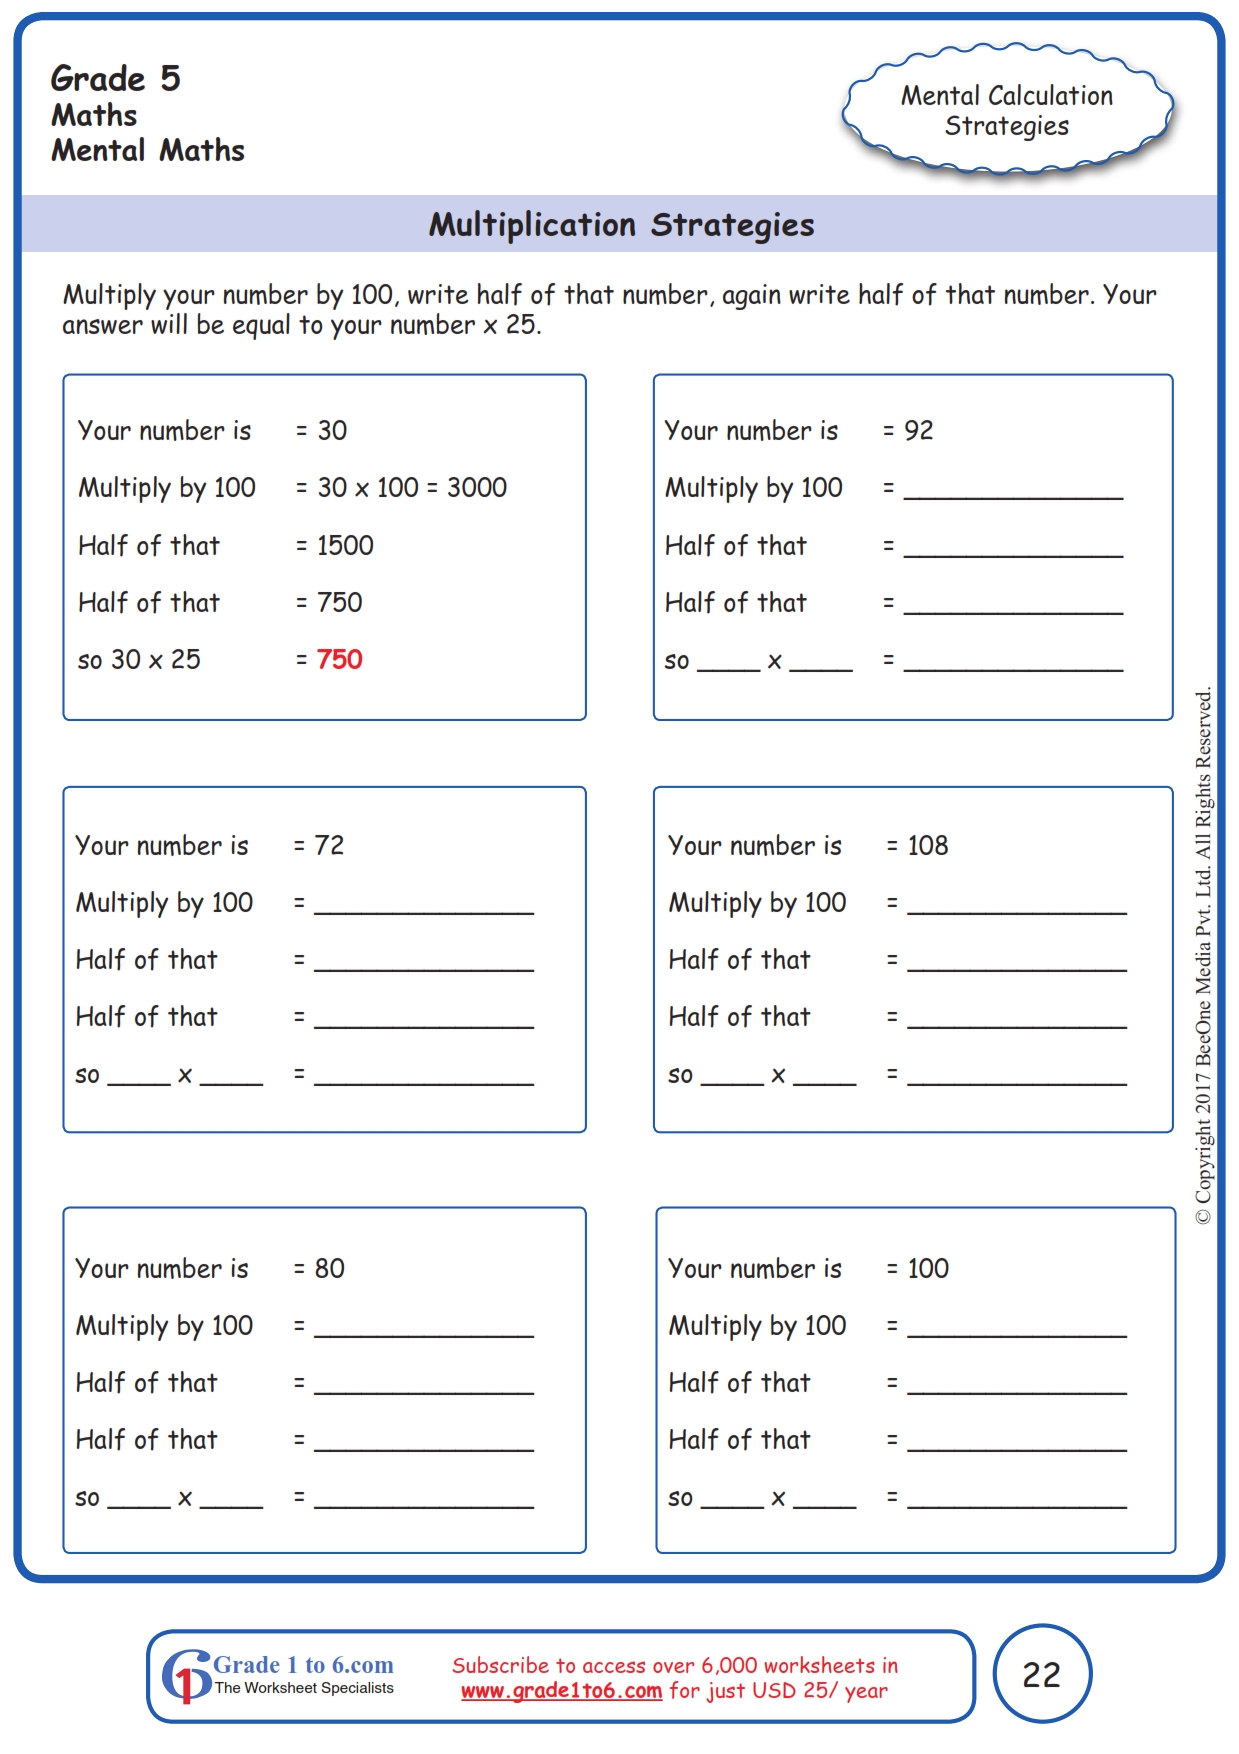 multiplication-practice-sheets-printable